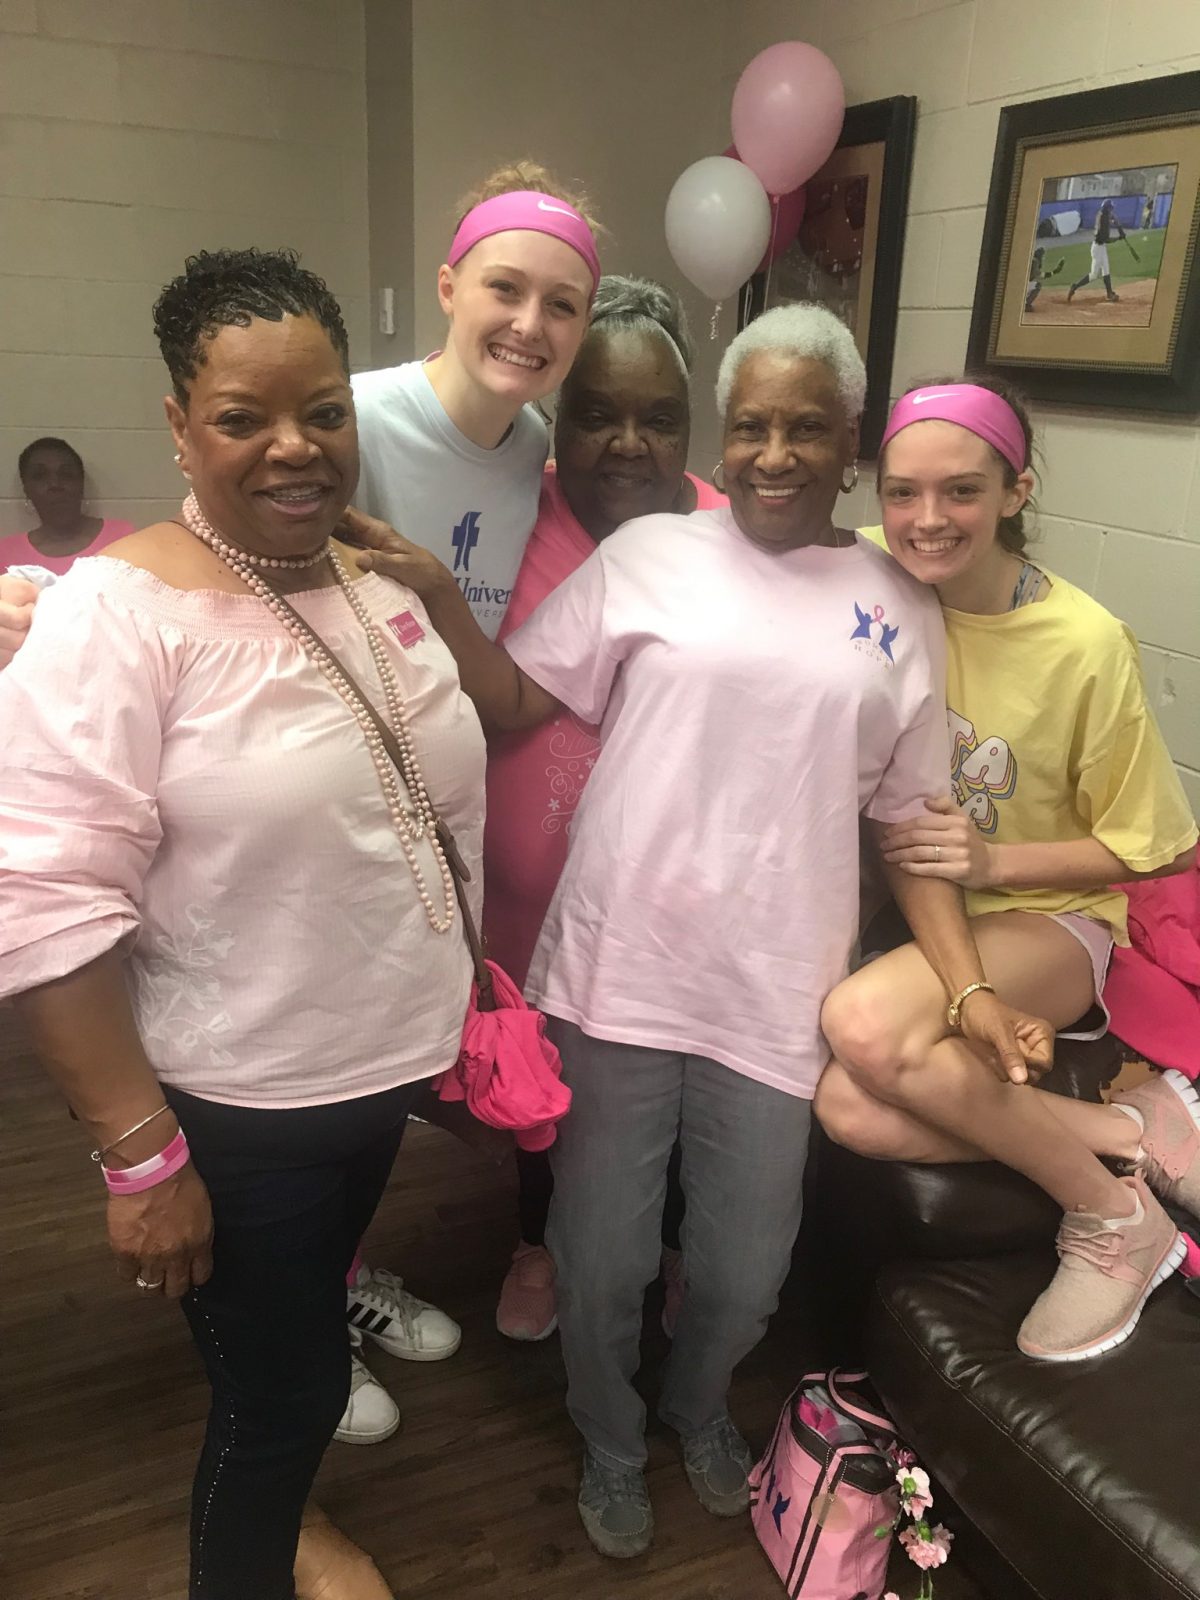 Breast Cancer survivors pose with the Faulkner Women's Basketball team during their PinkOut game in 2020.